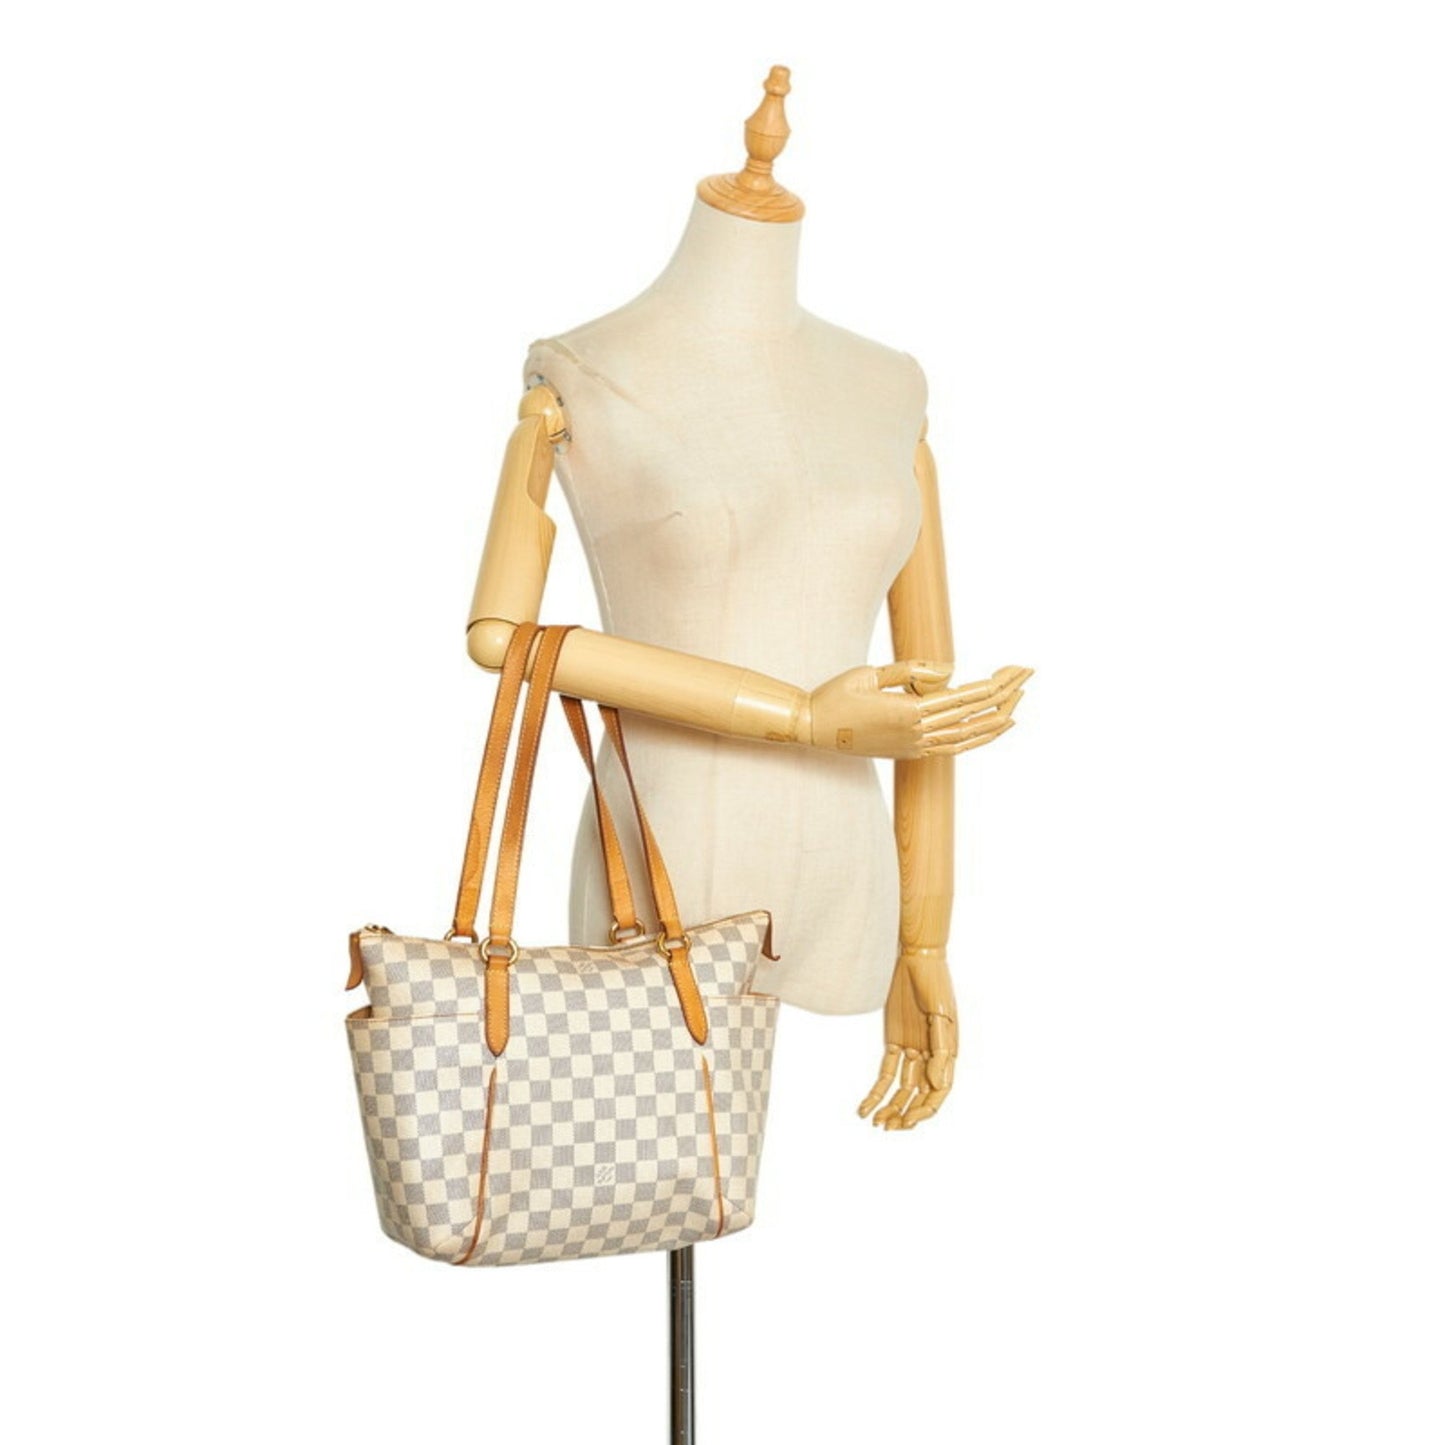 Louis Vuitton White Leather Totally tote bag – Luxe Supply Company